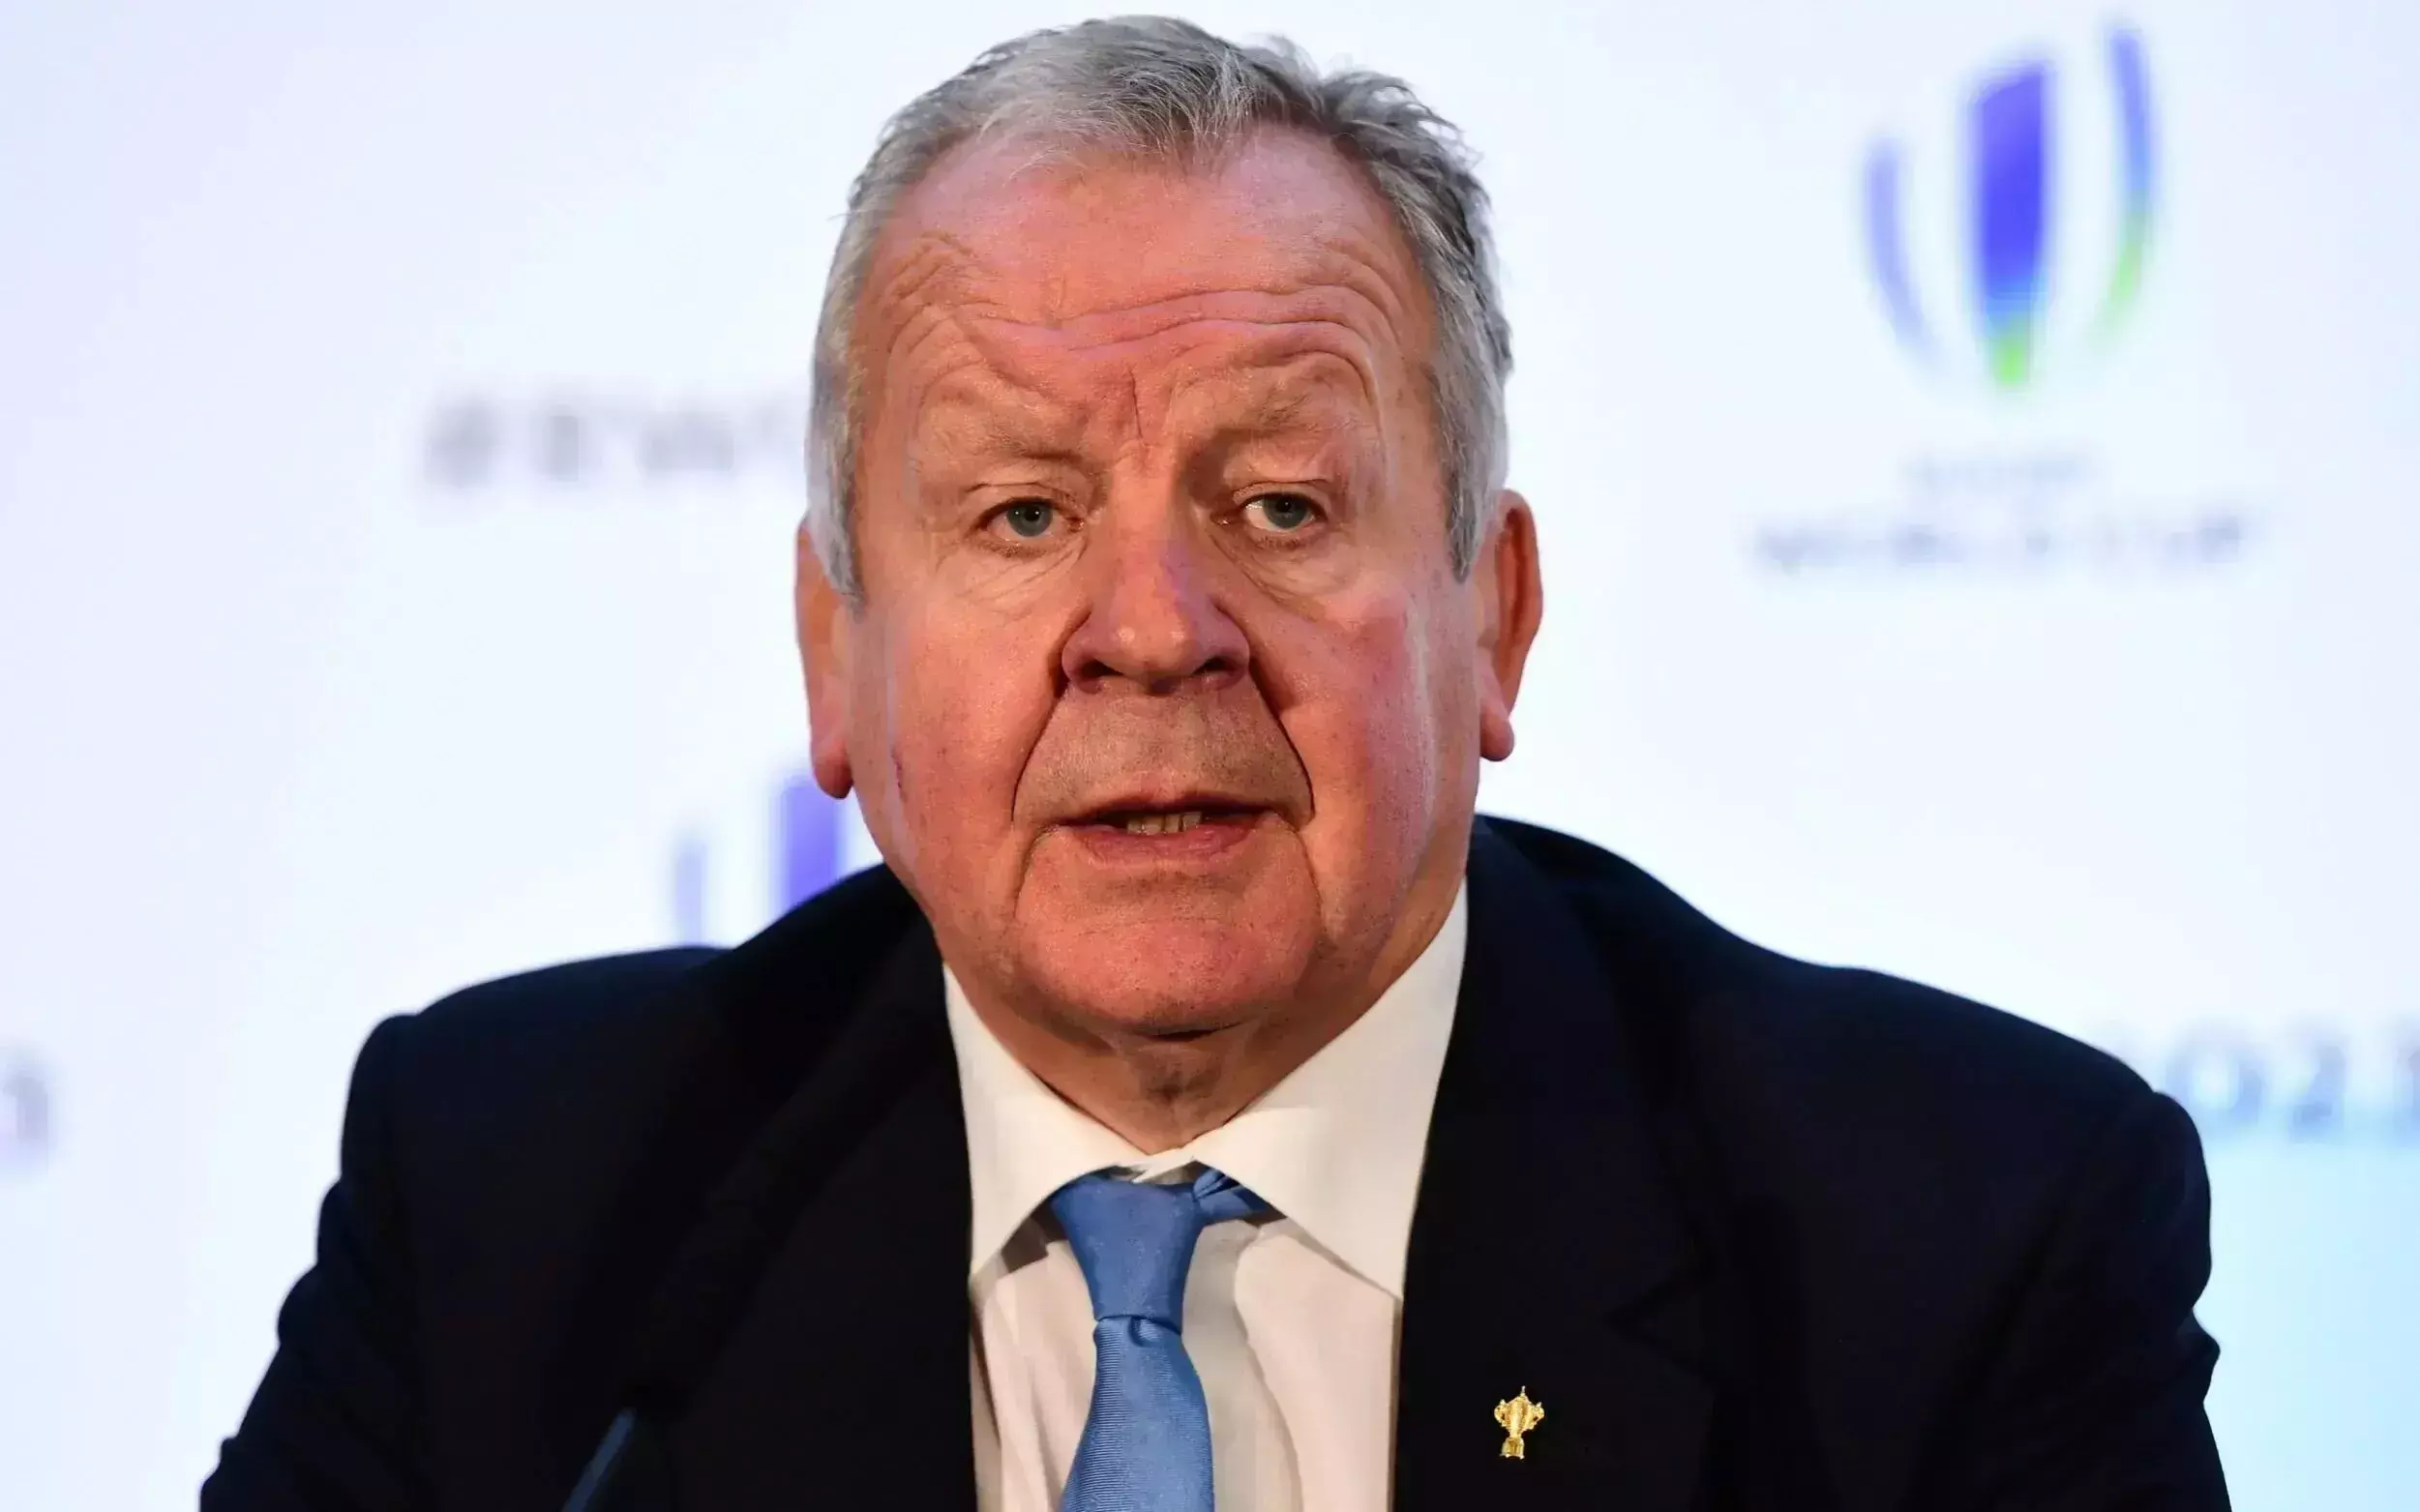 Beaumont re-elected World Rugby Chairman, calls for unity amid COVID-19 crisis